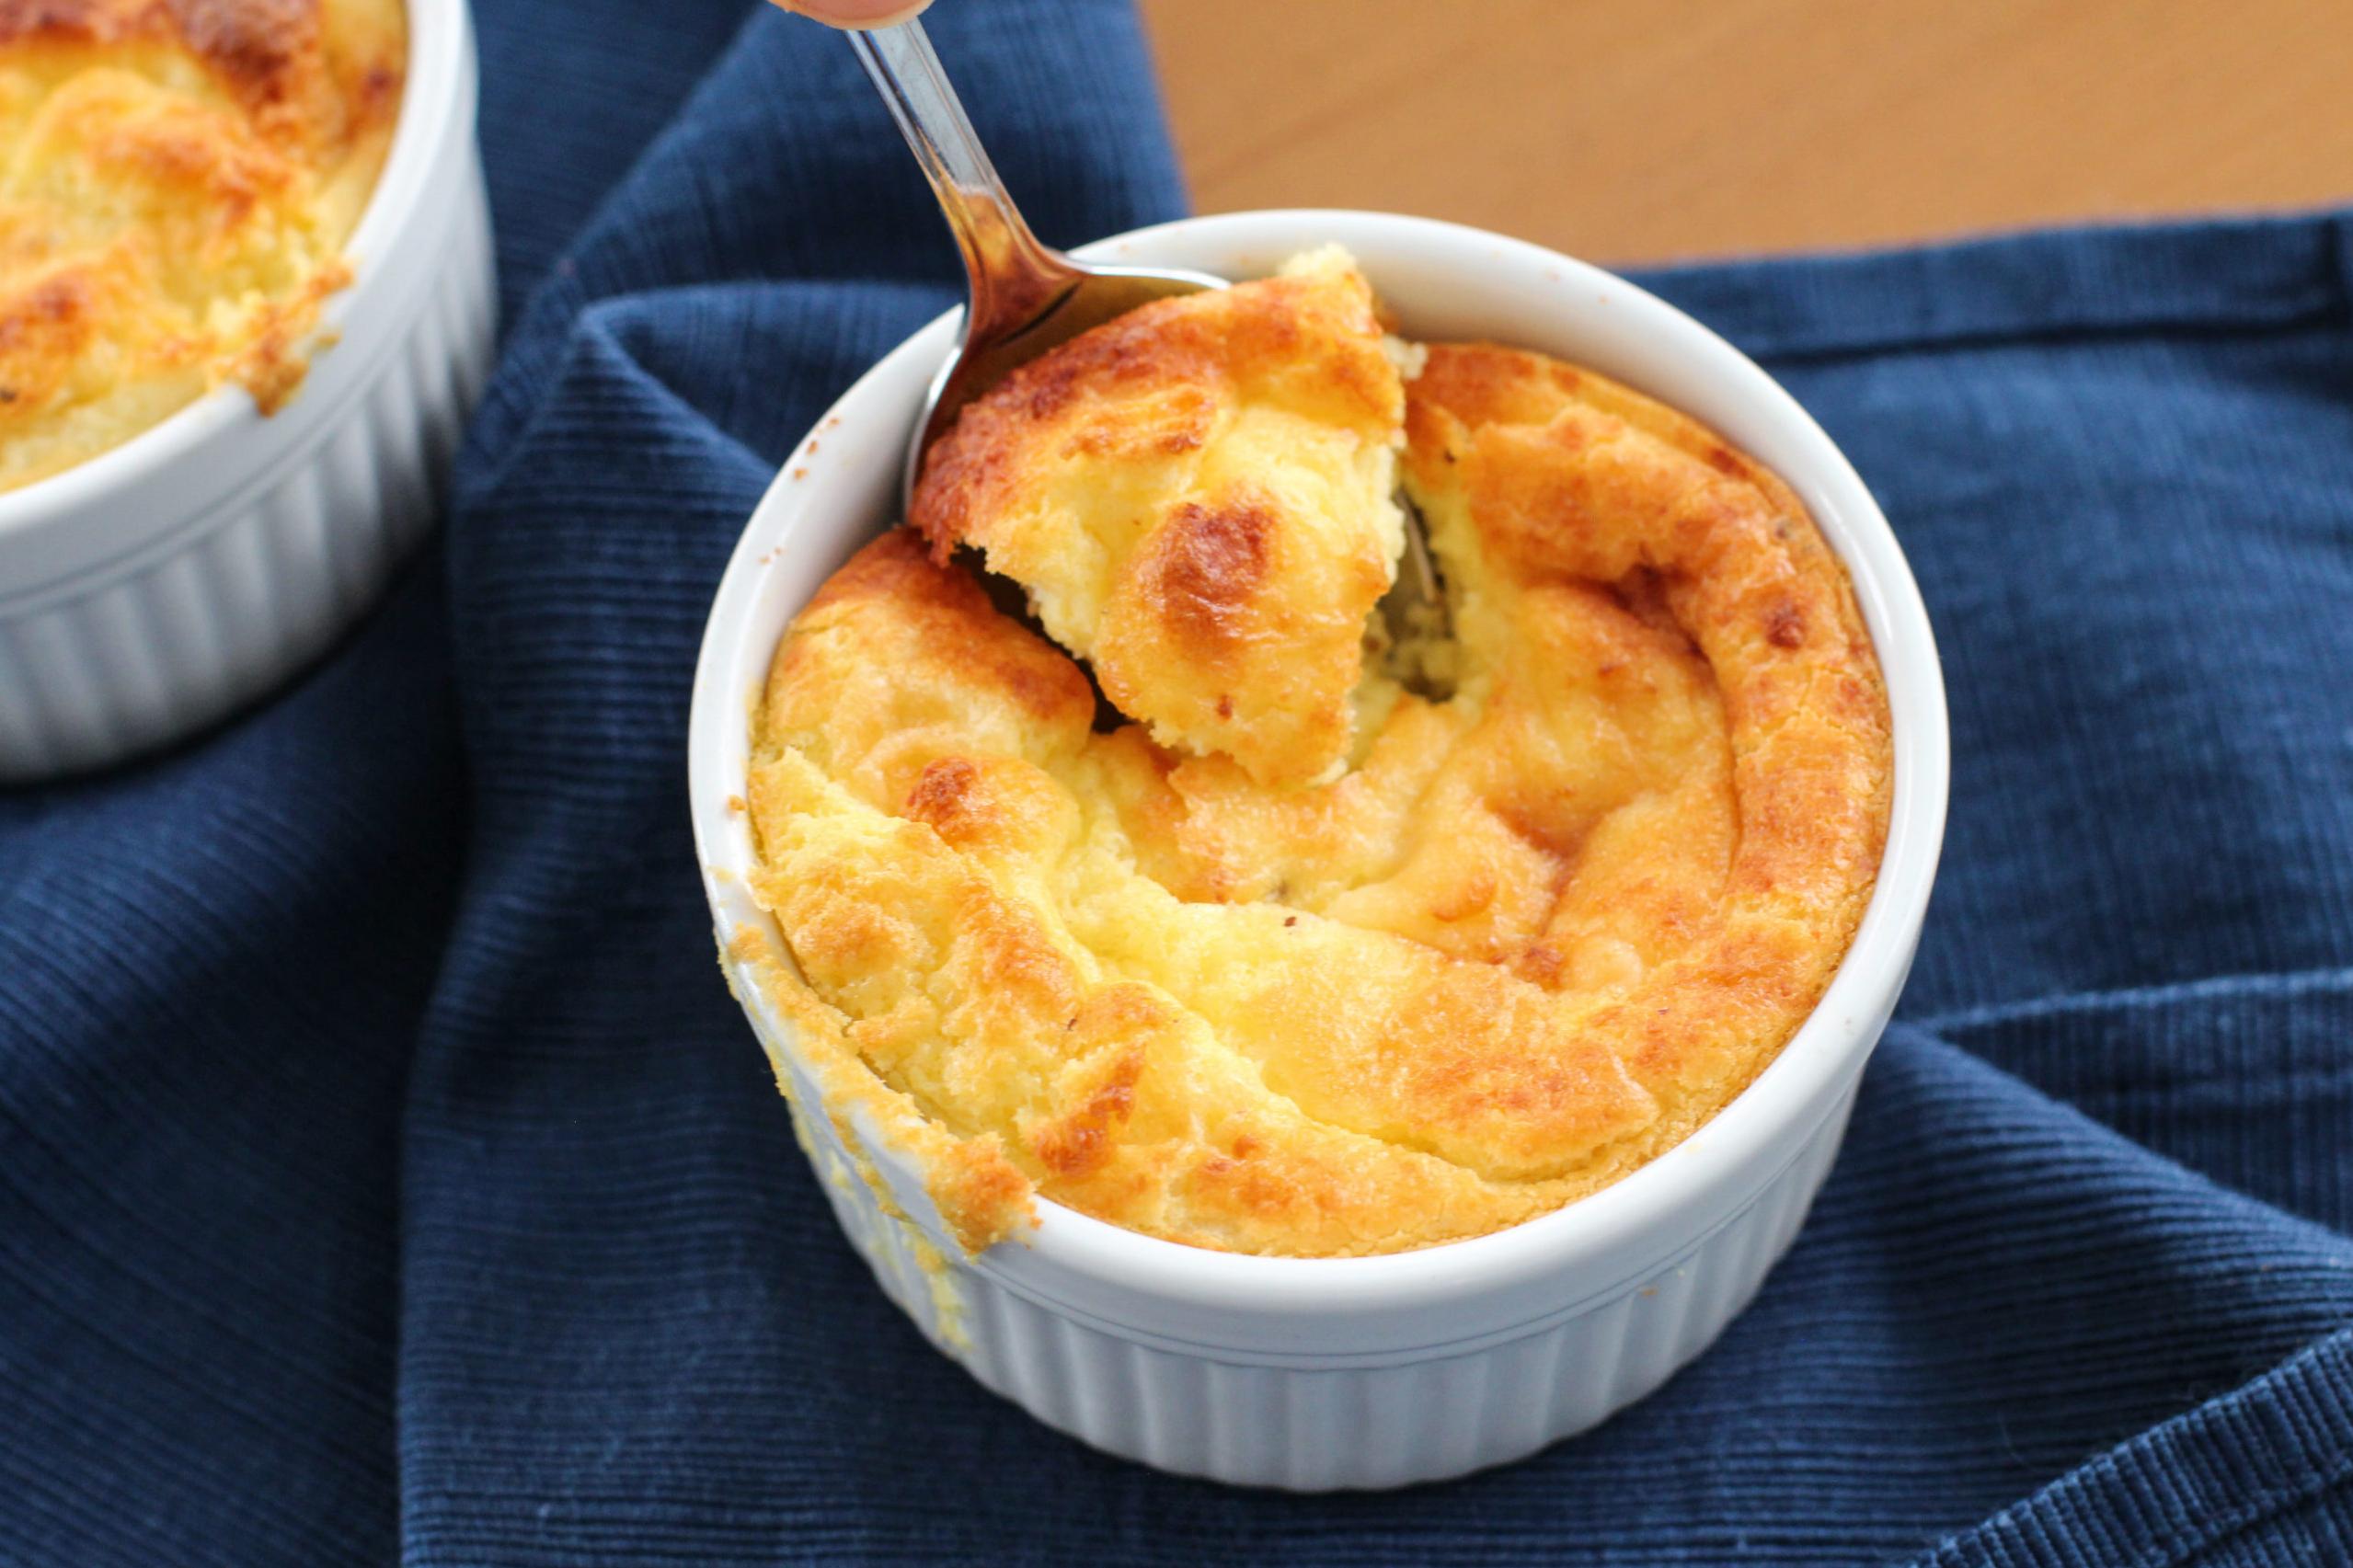  If you're a cheese lover, this soufflé is sure to be a new favorite.